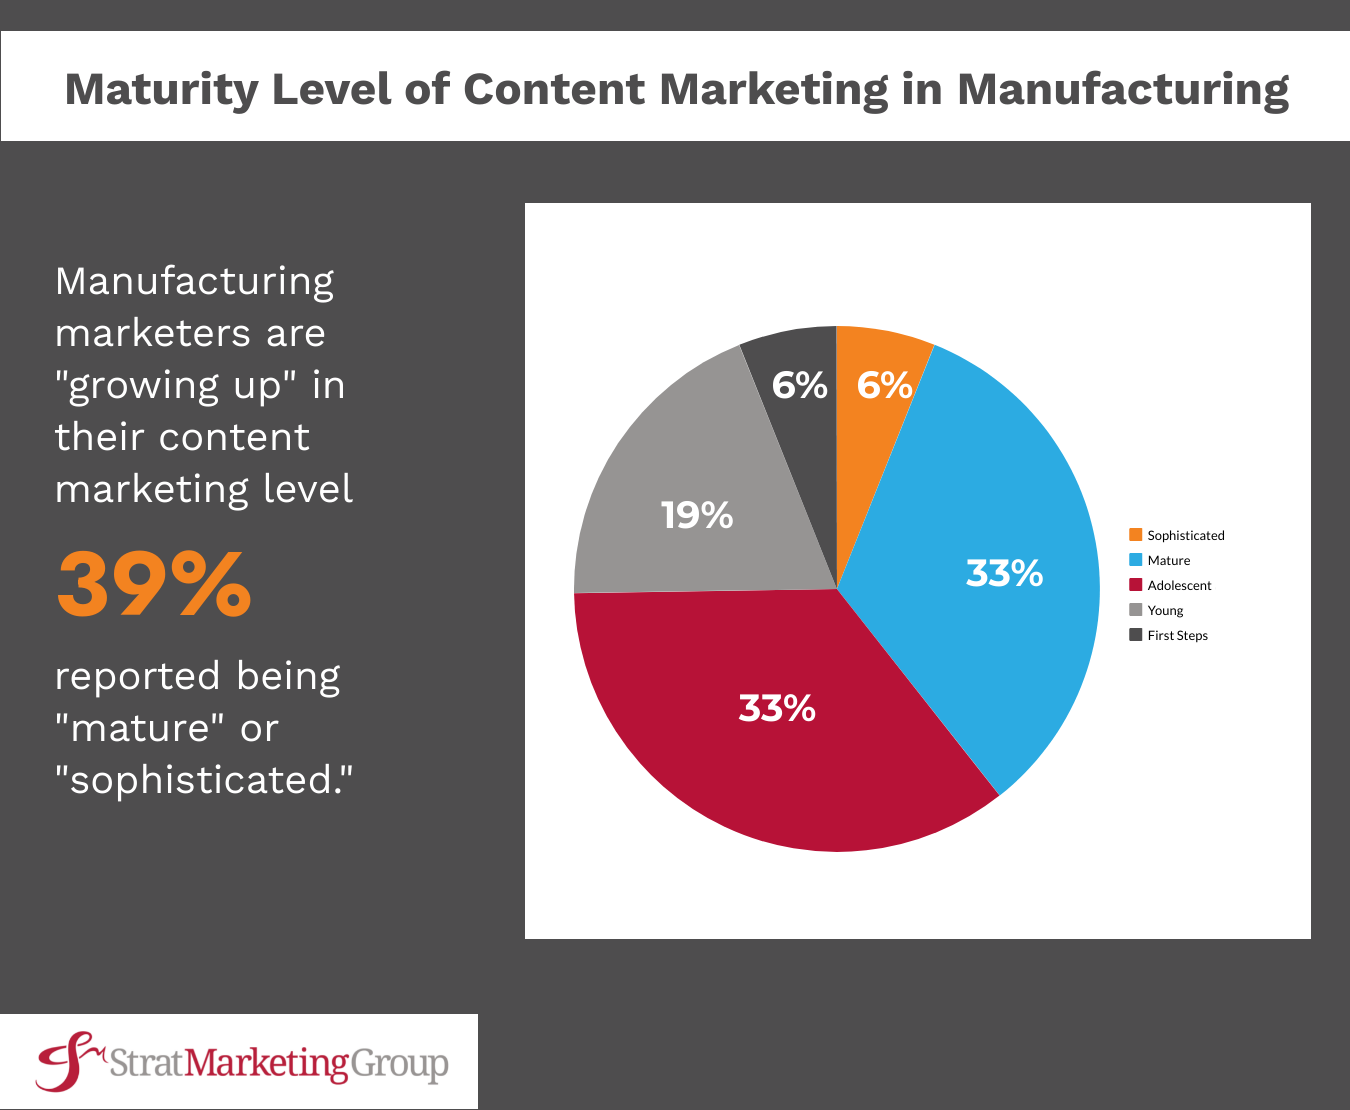 content marketing for manufacturers continues to mature according to this data from Global Spec. 6% remain in "First Steps" maturity. 19% say their organization is "Young" at content marketing. 33% report being "Adolescent." 33% report "Mature" and 6% report "Sophisticated."